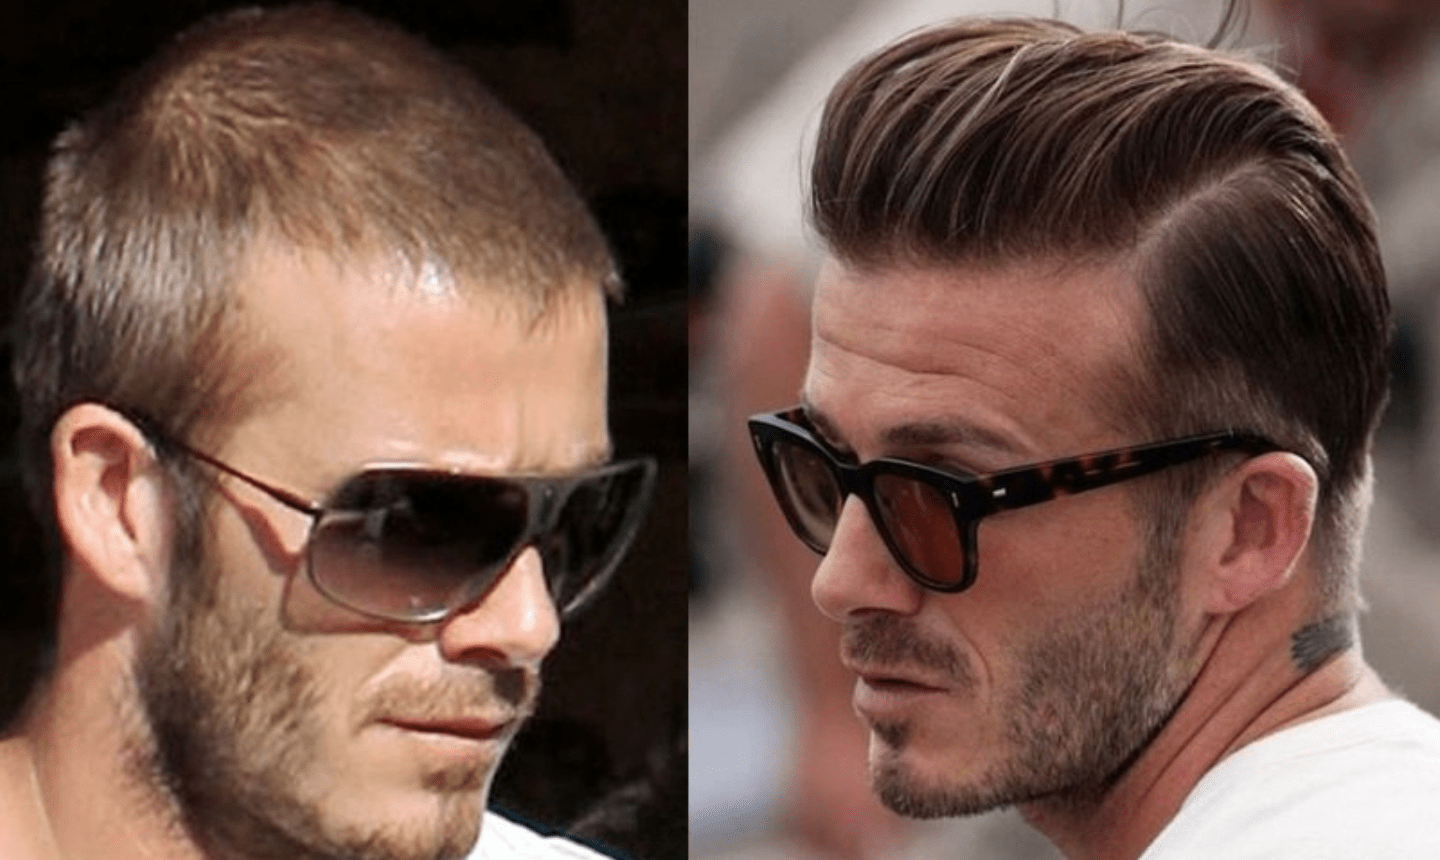 David Beckham hair transplant. After all, a person's appearance and self-confidence are closely linked to the quality of their hair.